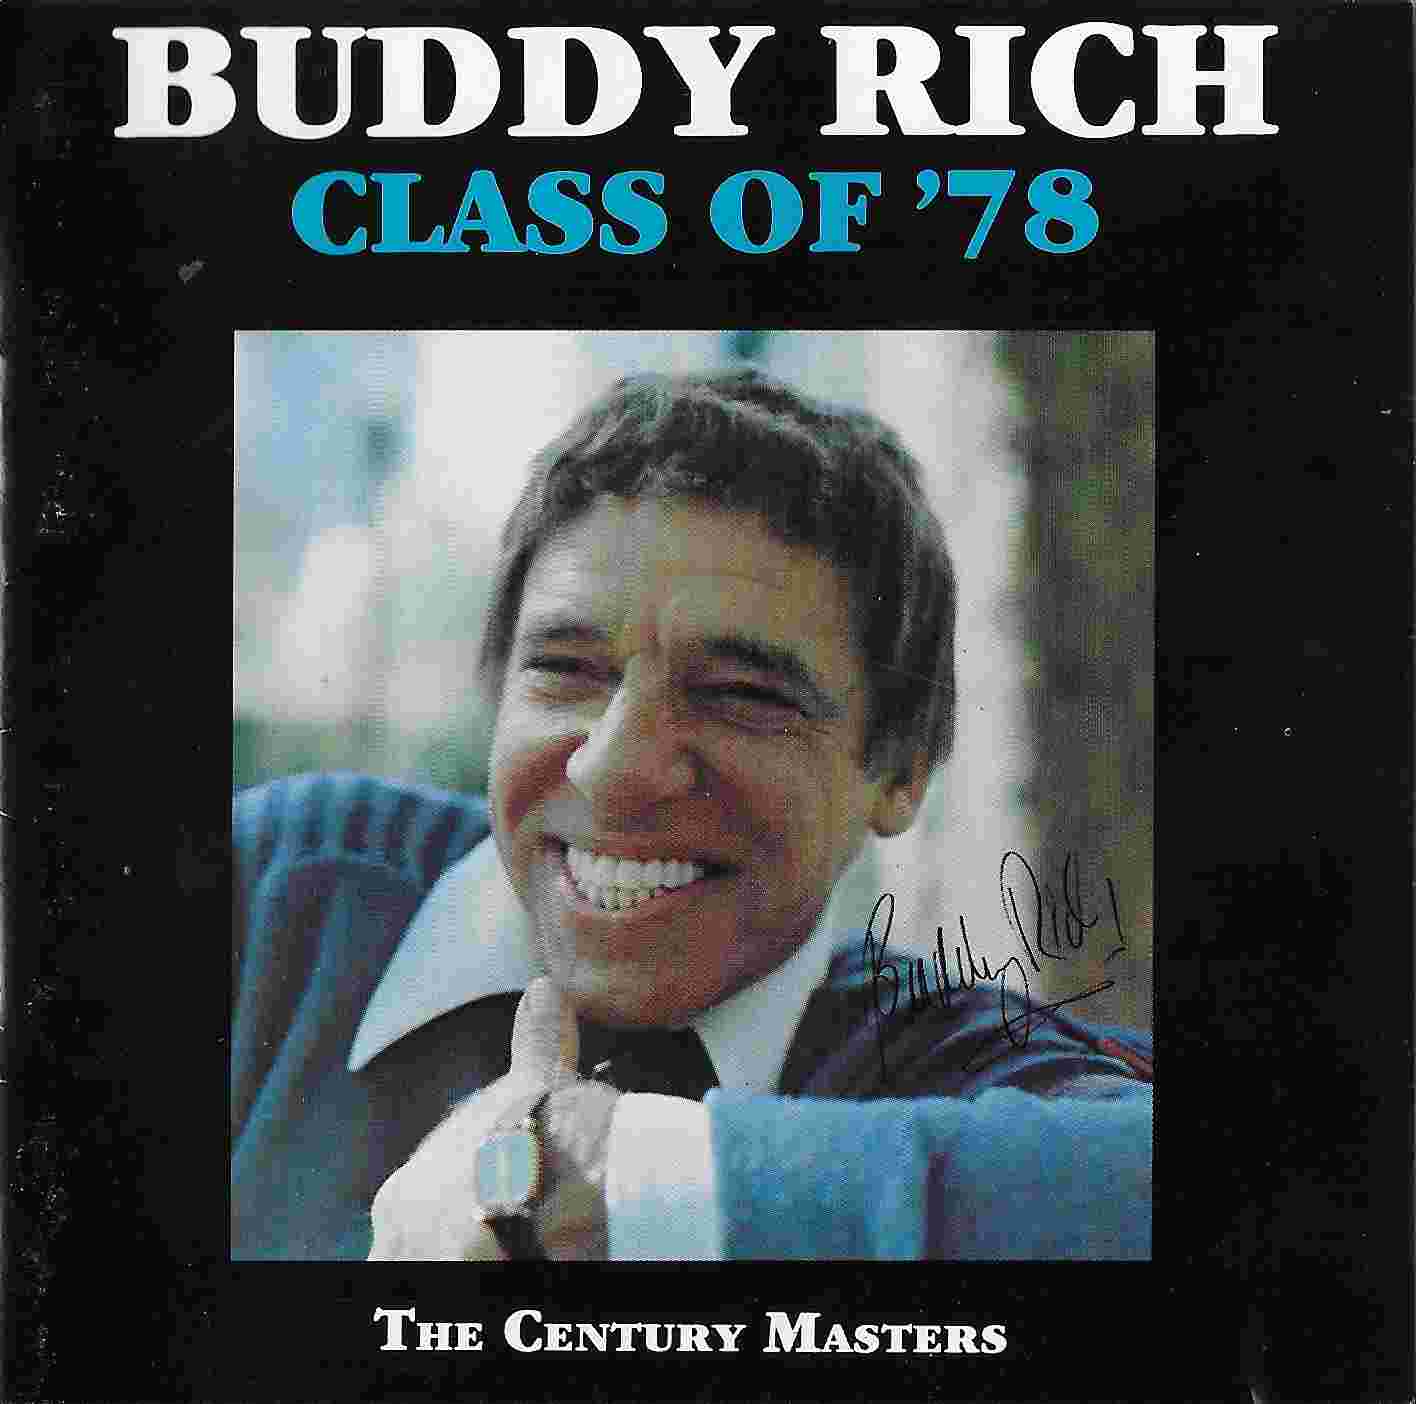 Picture of CJCD 832 The Century Catalogue - Buddy Rich class of 78 - The Buddy Rich Big Band by artist Buddy Rich from the BBC cds - Records and Tapes library